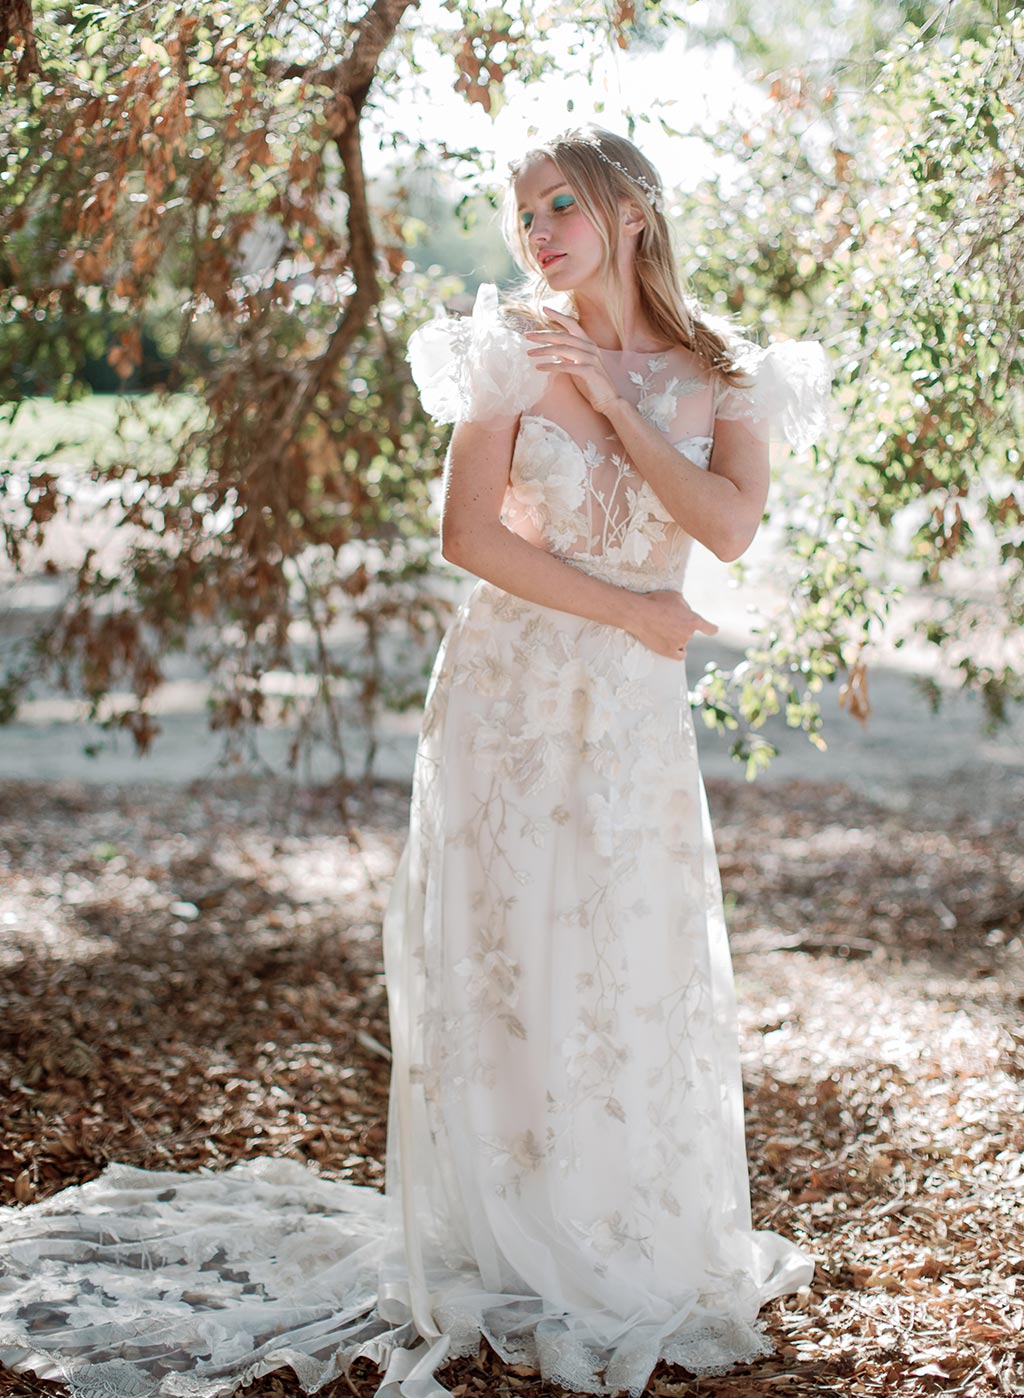 Chloris bridal gown by Claire Pettibone